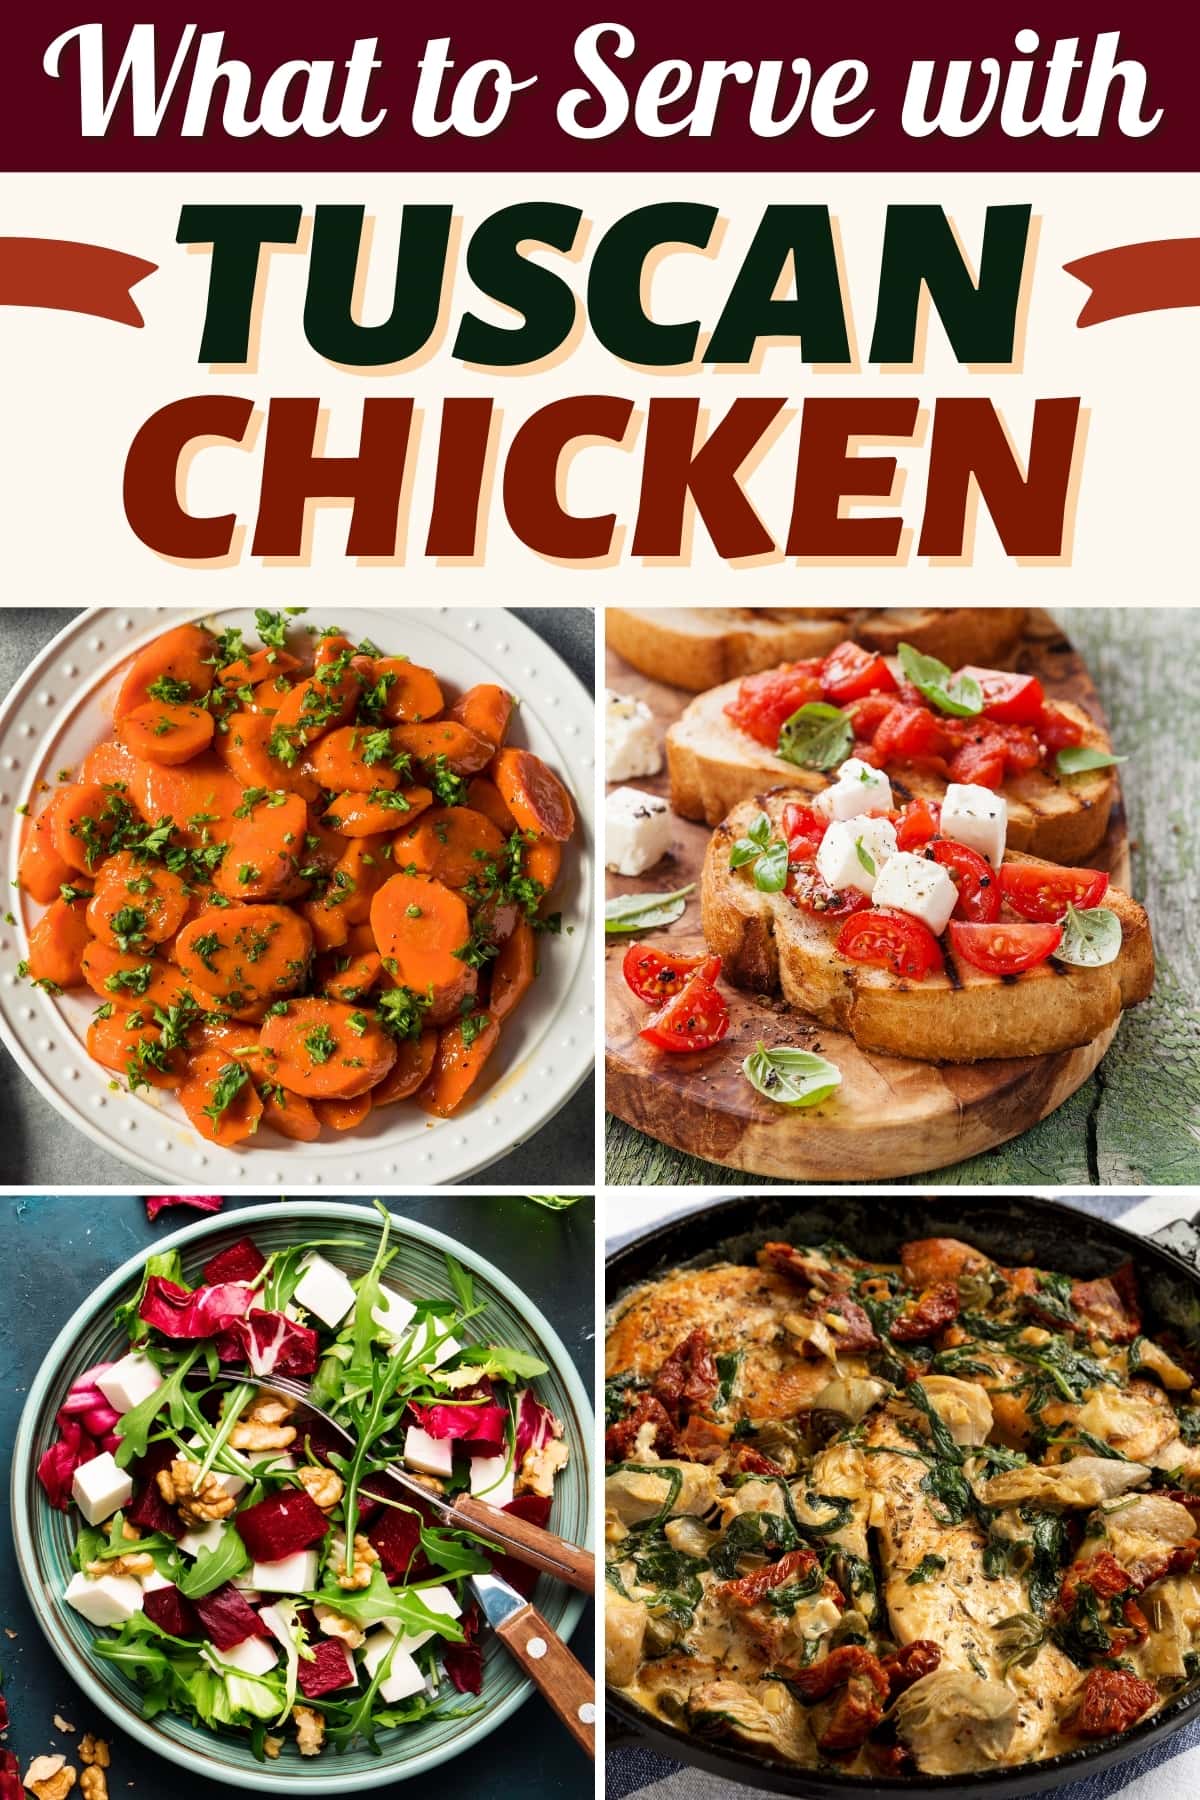 What to Serve with Tuscan Chicken (25 Best Side Dishes)